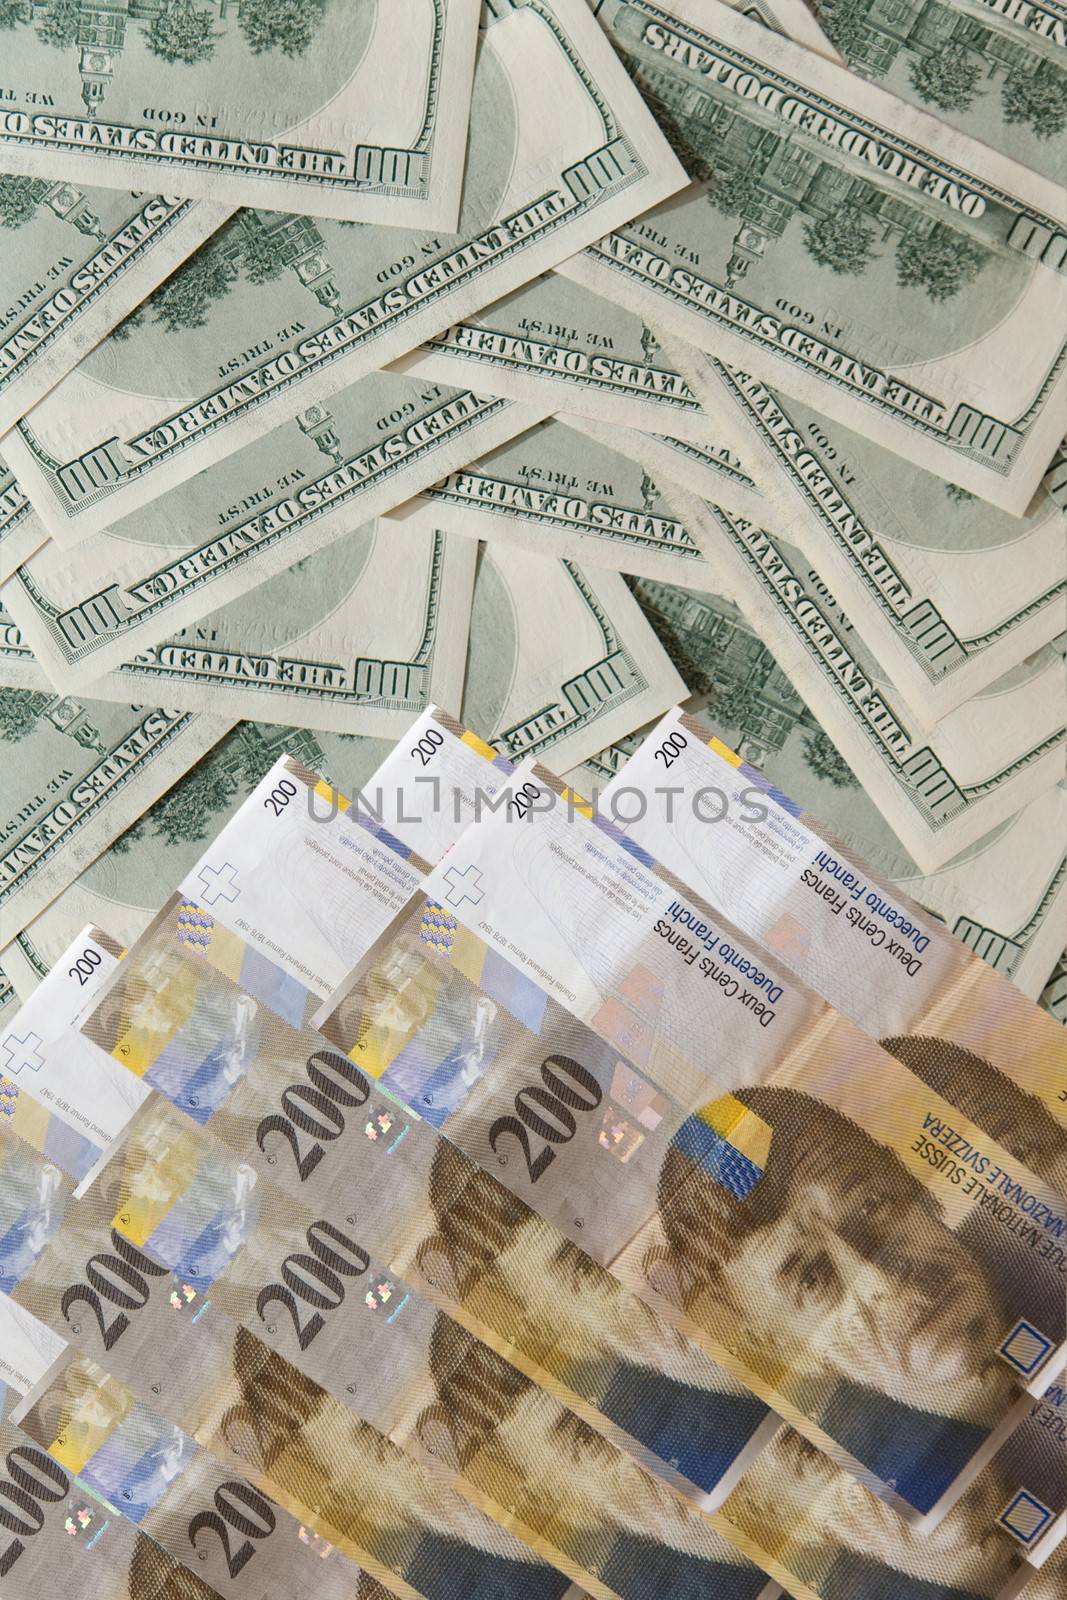 Image pile of banknotes - u.s. dollars and Swiss francs